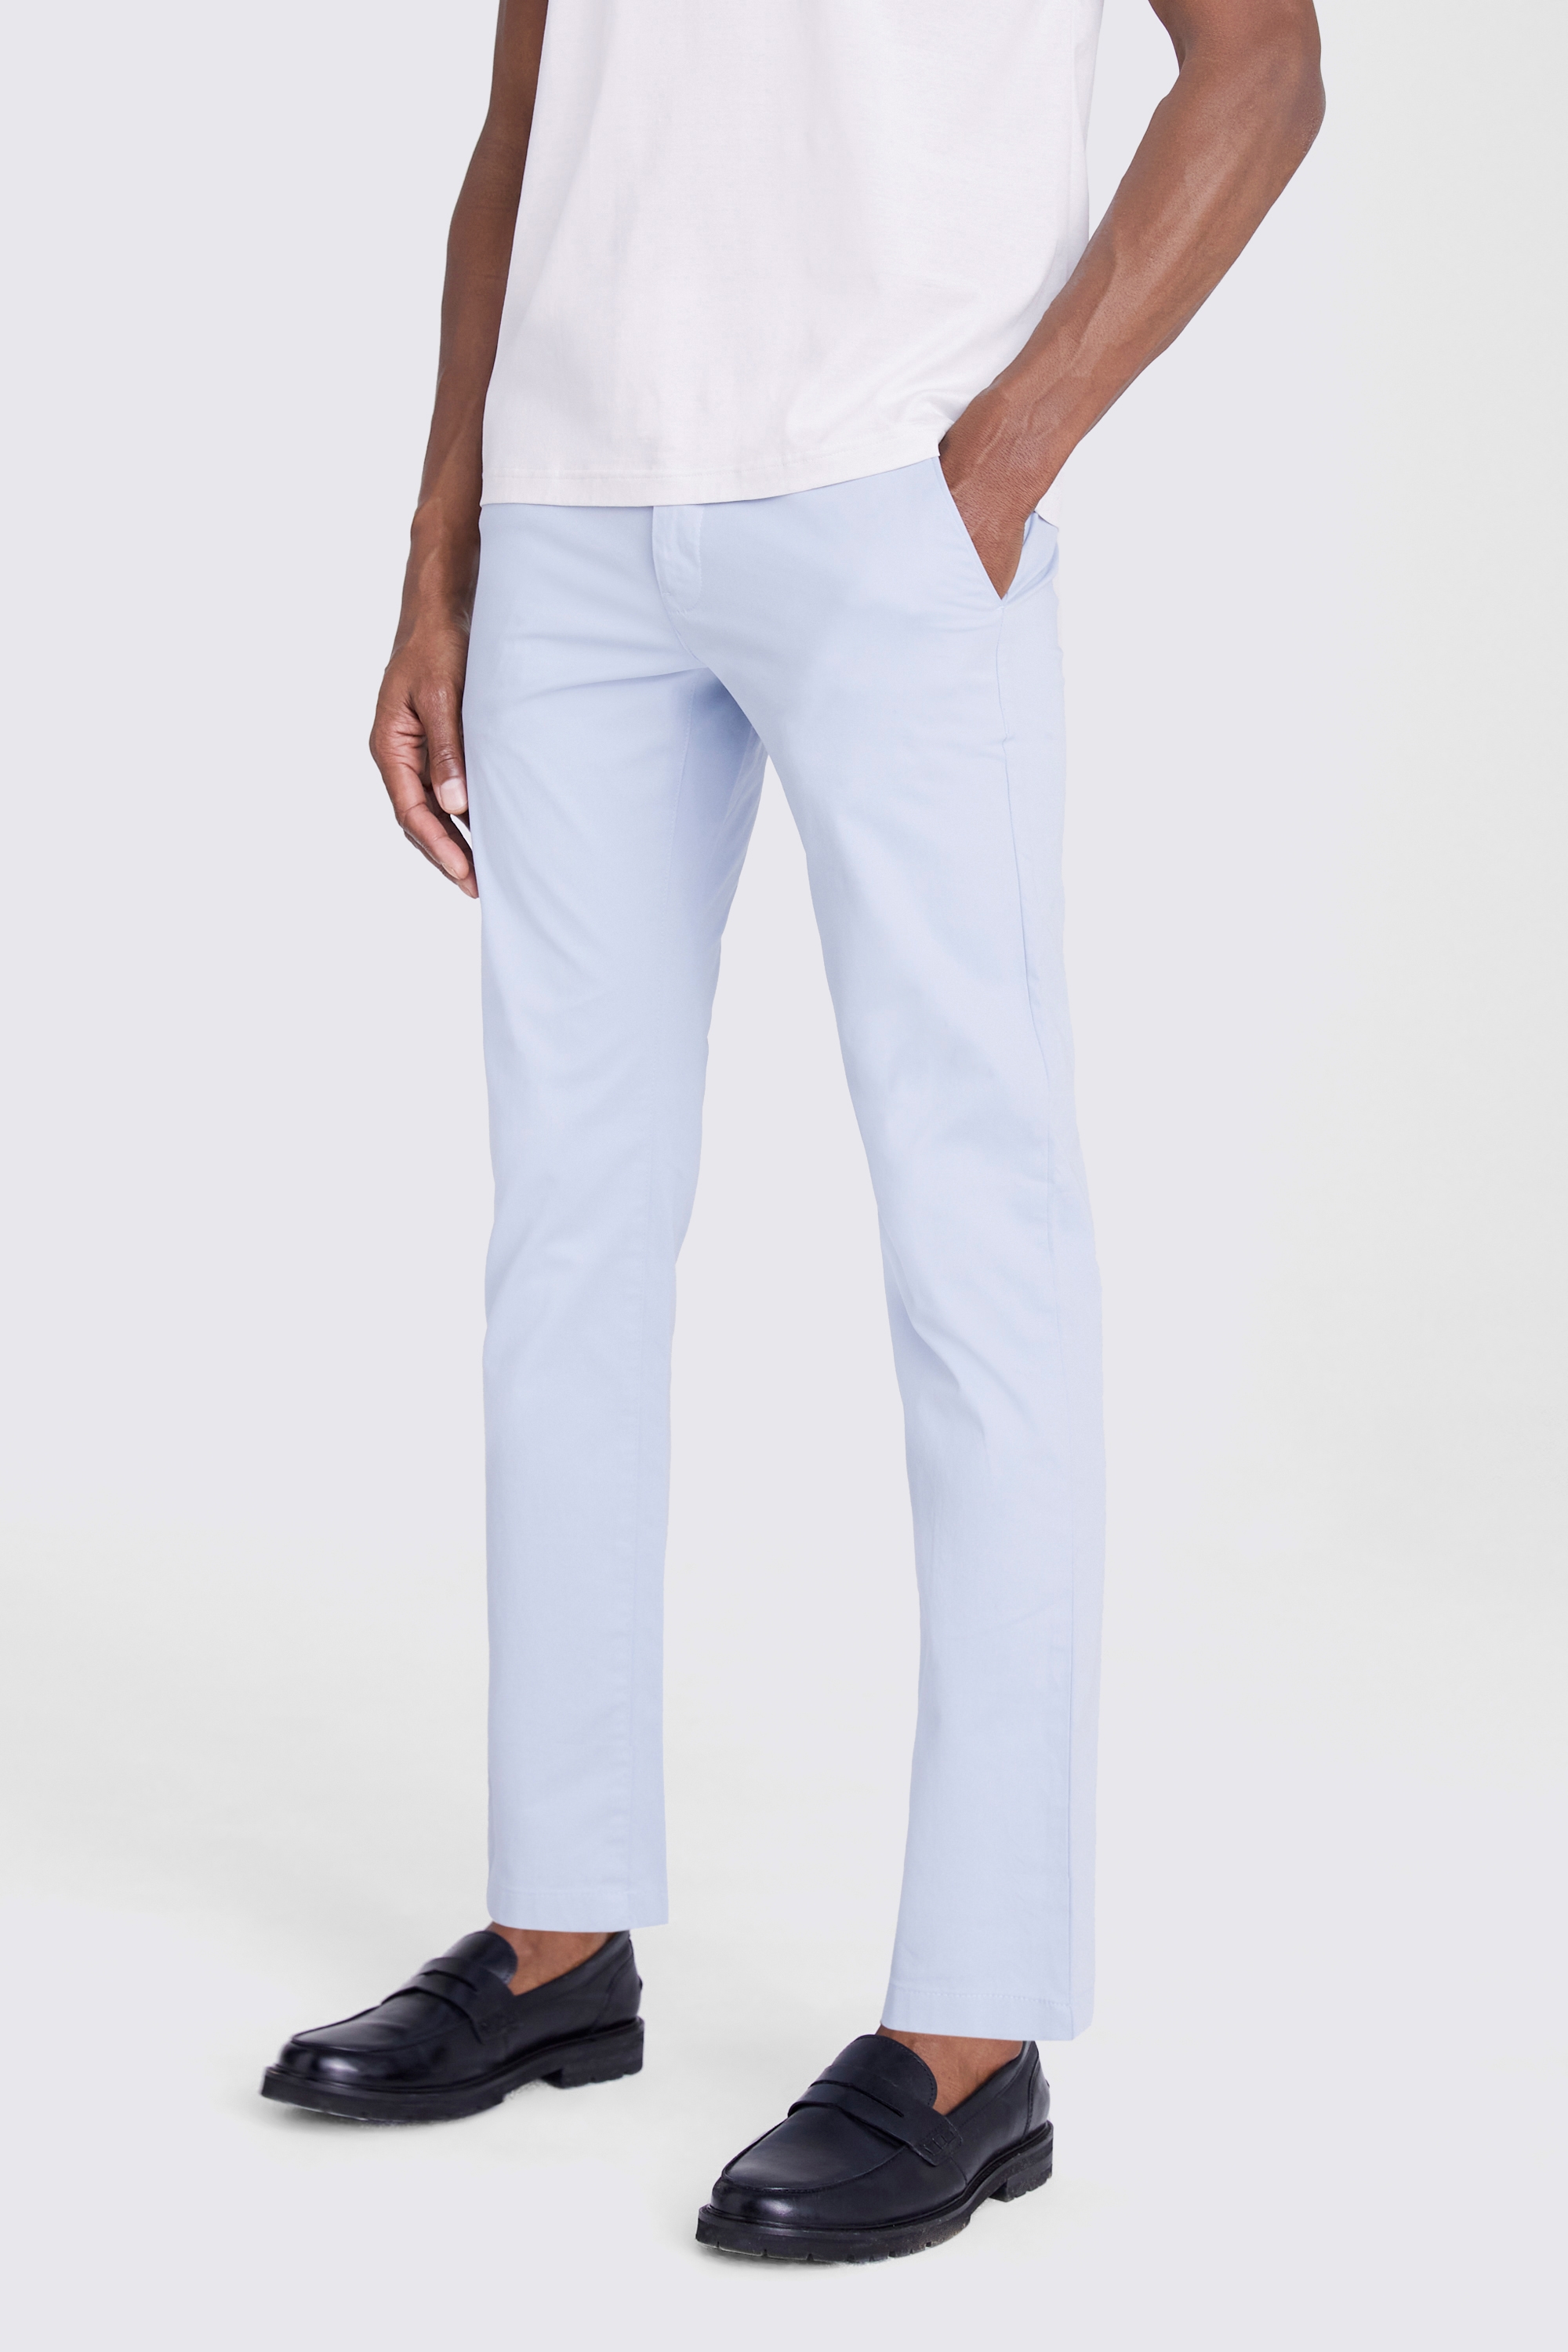 Tailored fit Light Blue Chinos | Buy Online at Moss